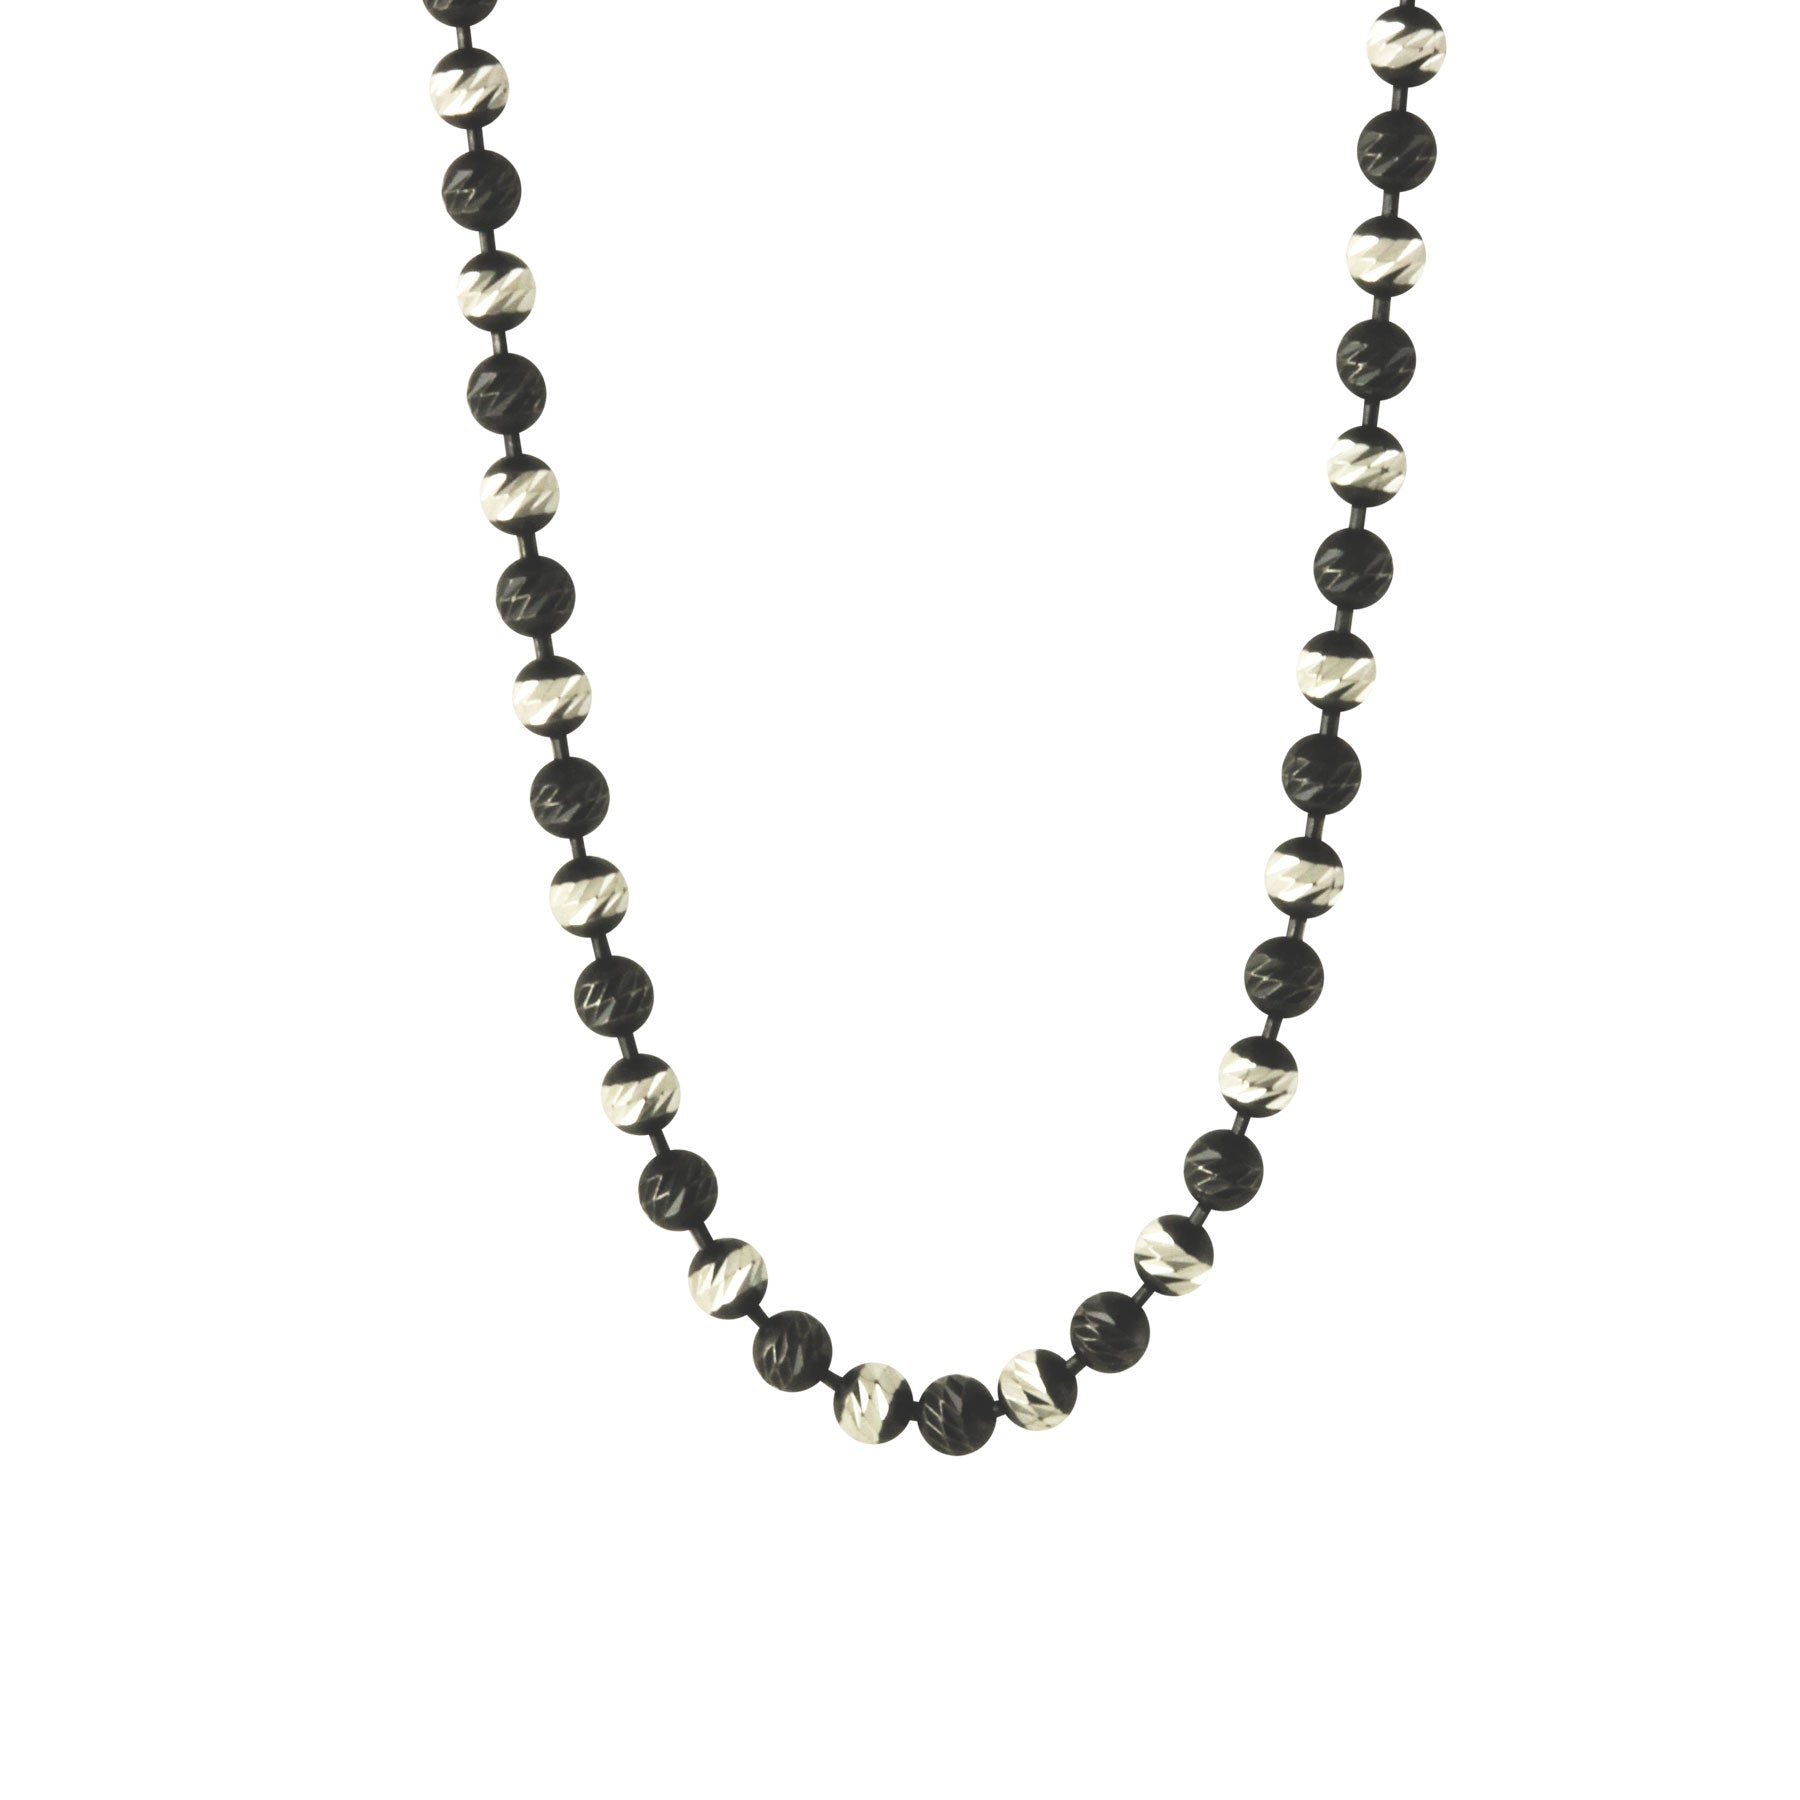 Black & White Beaded Chain Necklace - Mixed Metal Style